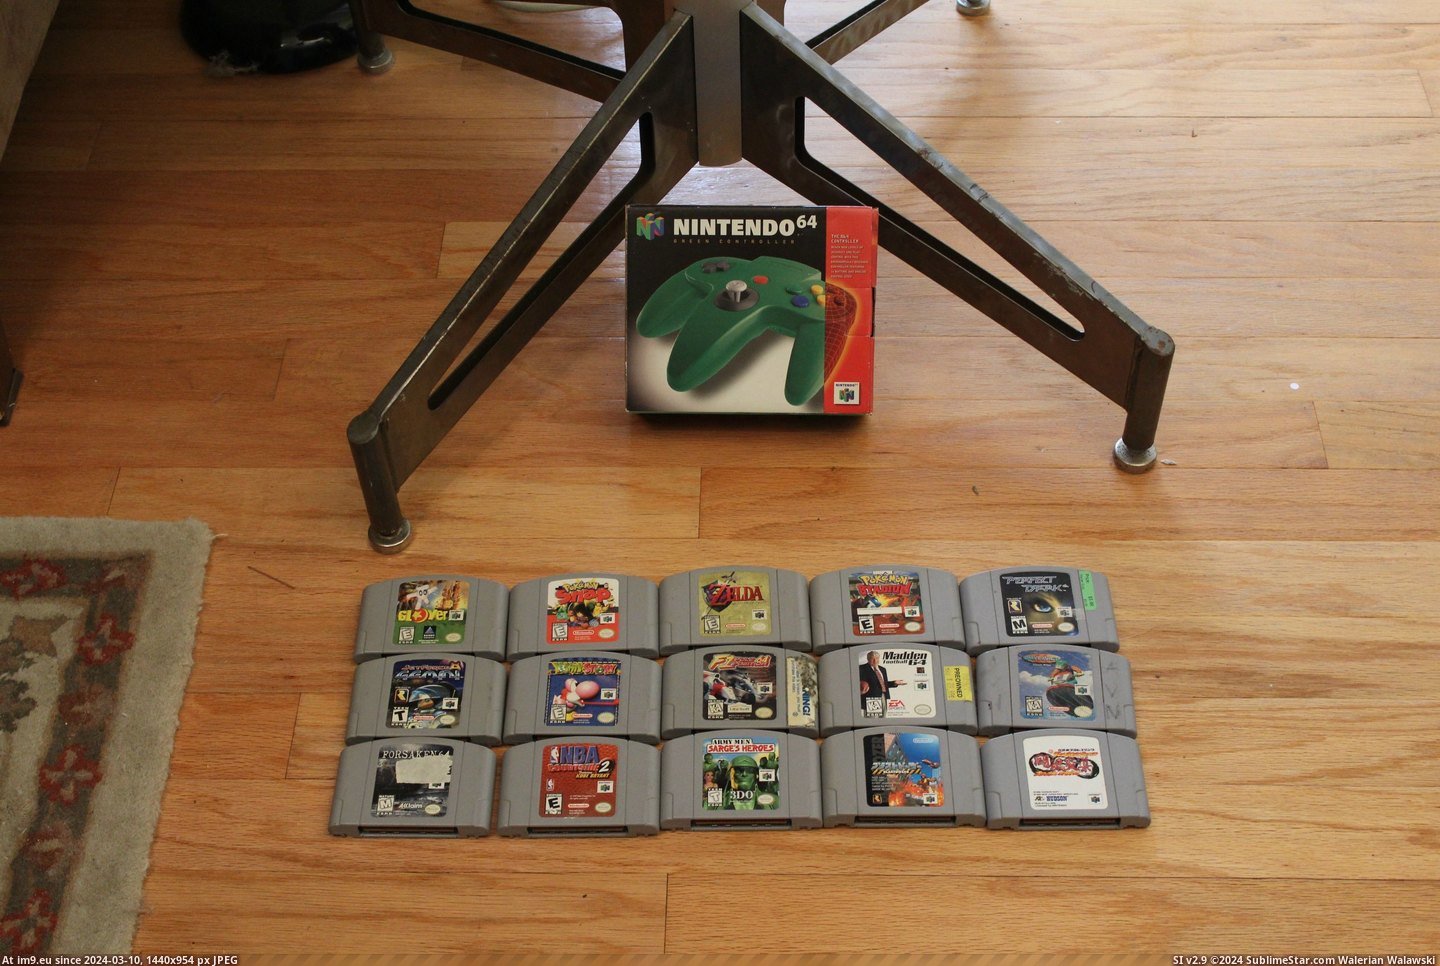 #Gaming #Year #Ago #Off #Demo #Craigslist #Unit #Rarest #Bought #Store #Own #N64 [Gaming] Bought a N64 Store Demo Unit off Craigslist 1 year ago. Probably the rarest thing I own. 6 Pic. (Image of album My r/GAMING favs))